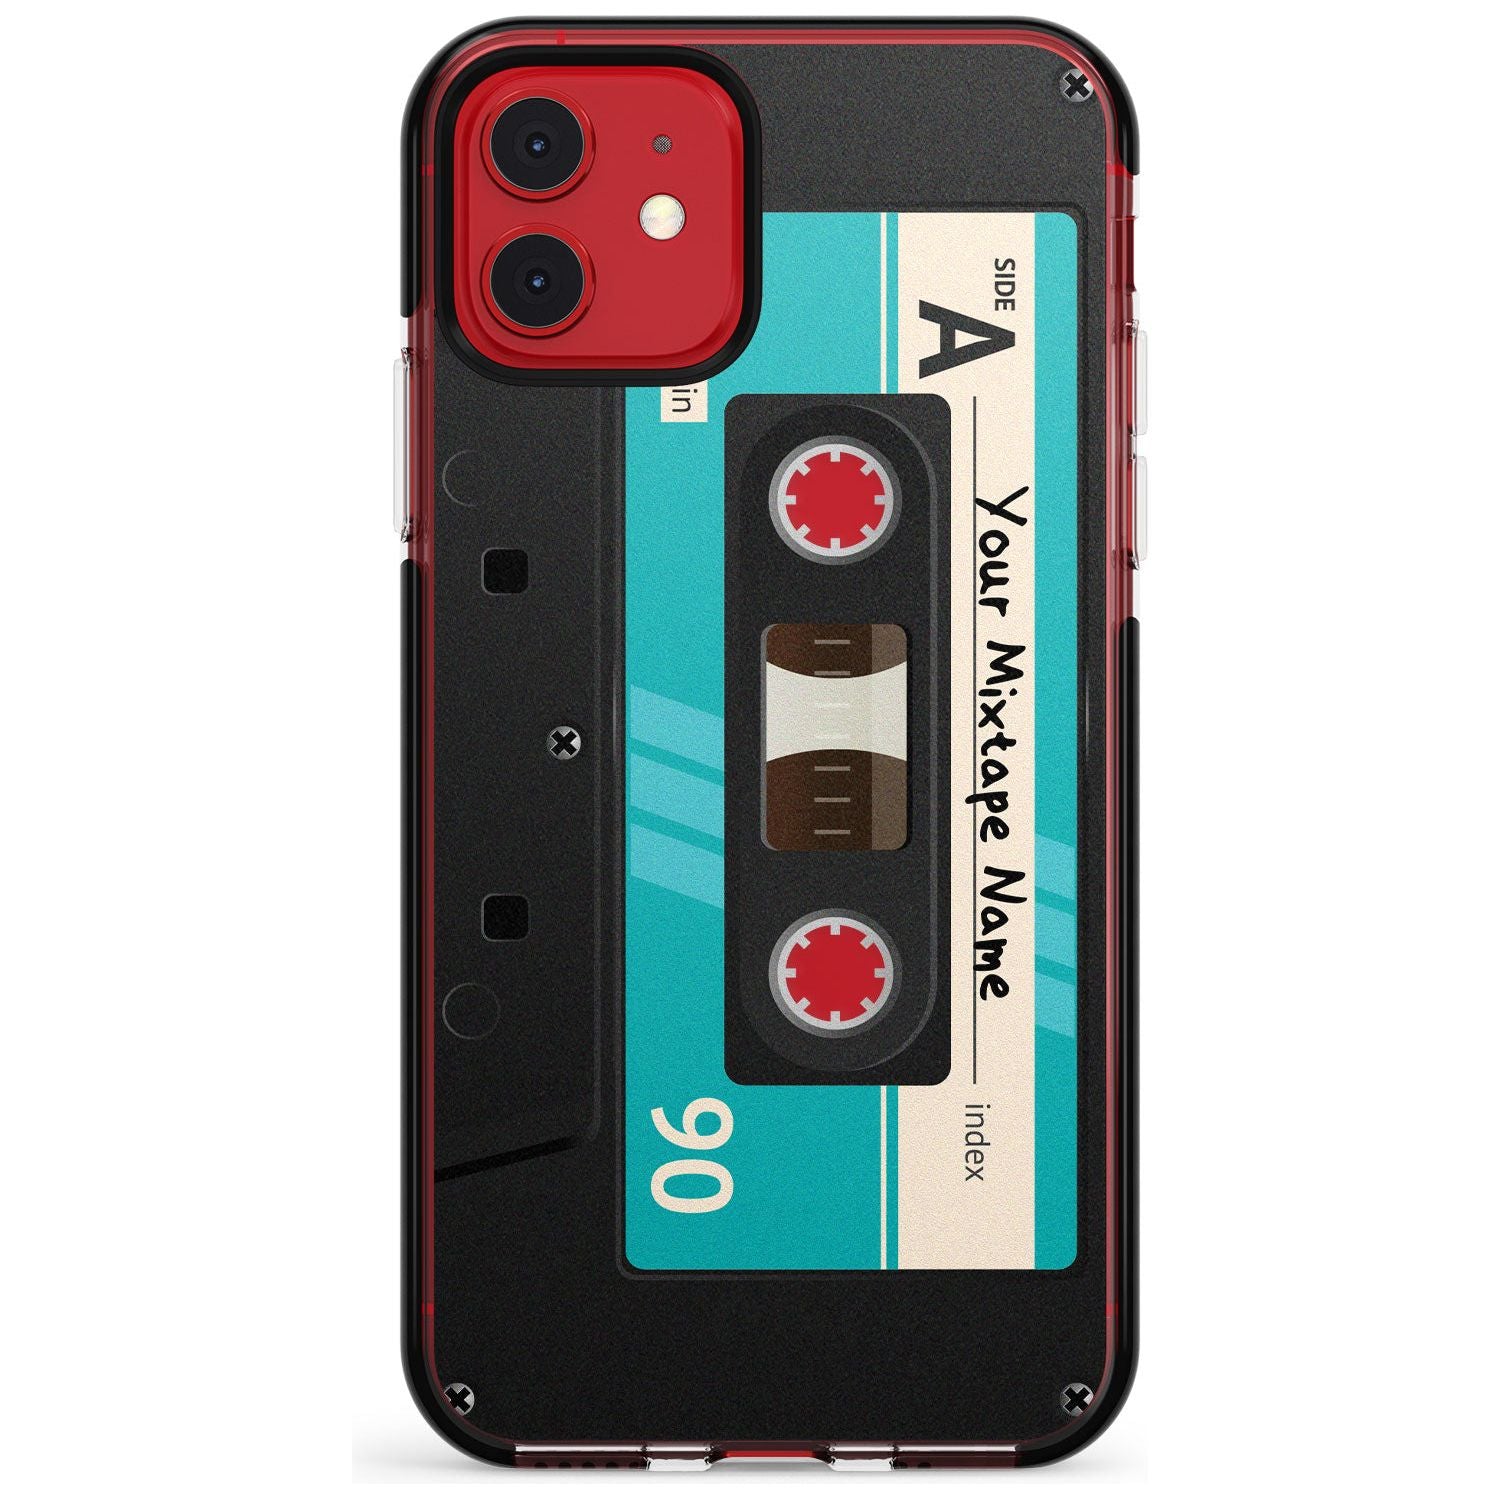 Dark Cassette Pink Fade Impact Phone Case for iPhone 11 Pro Max